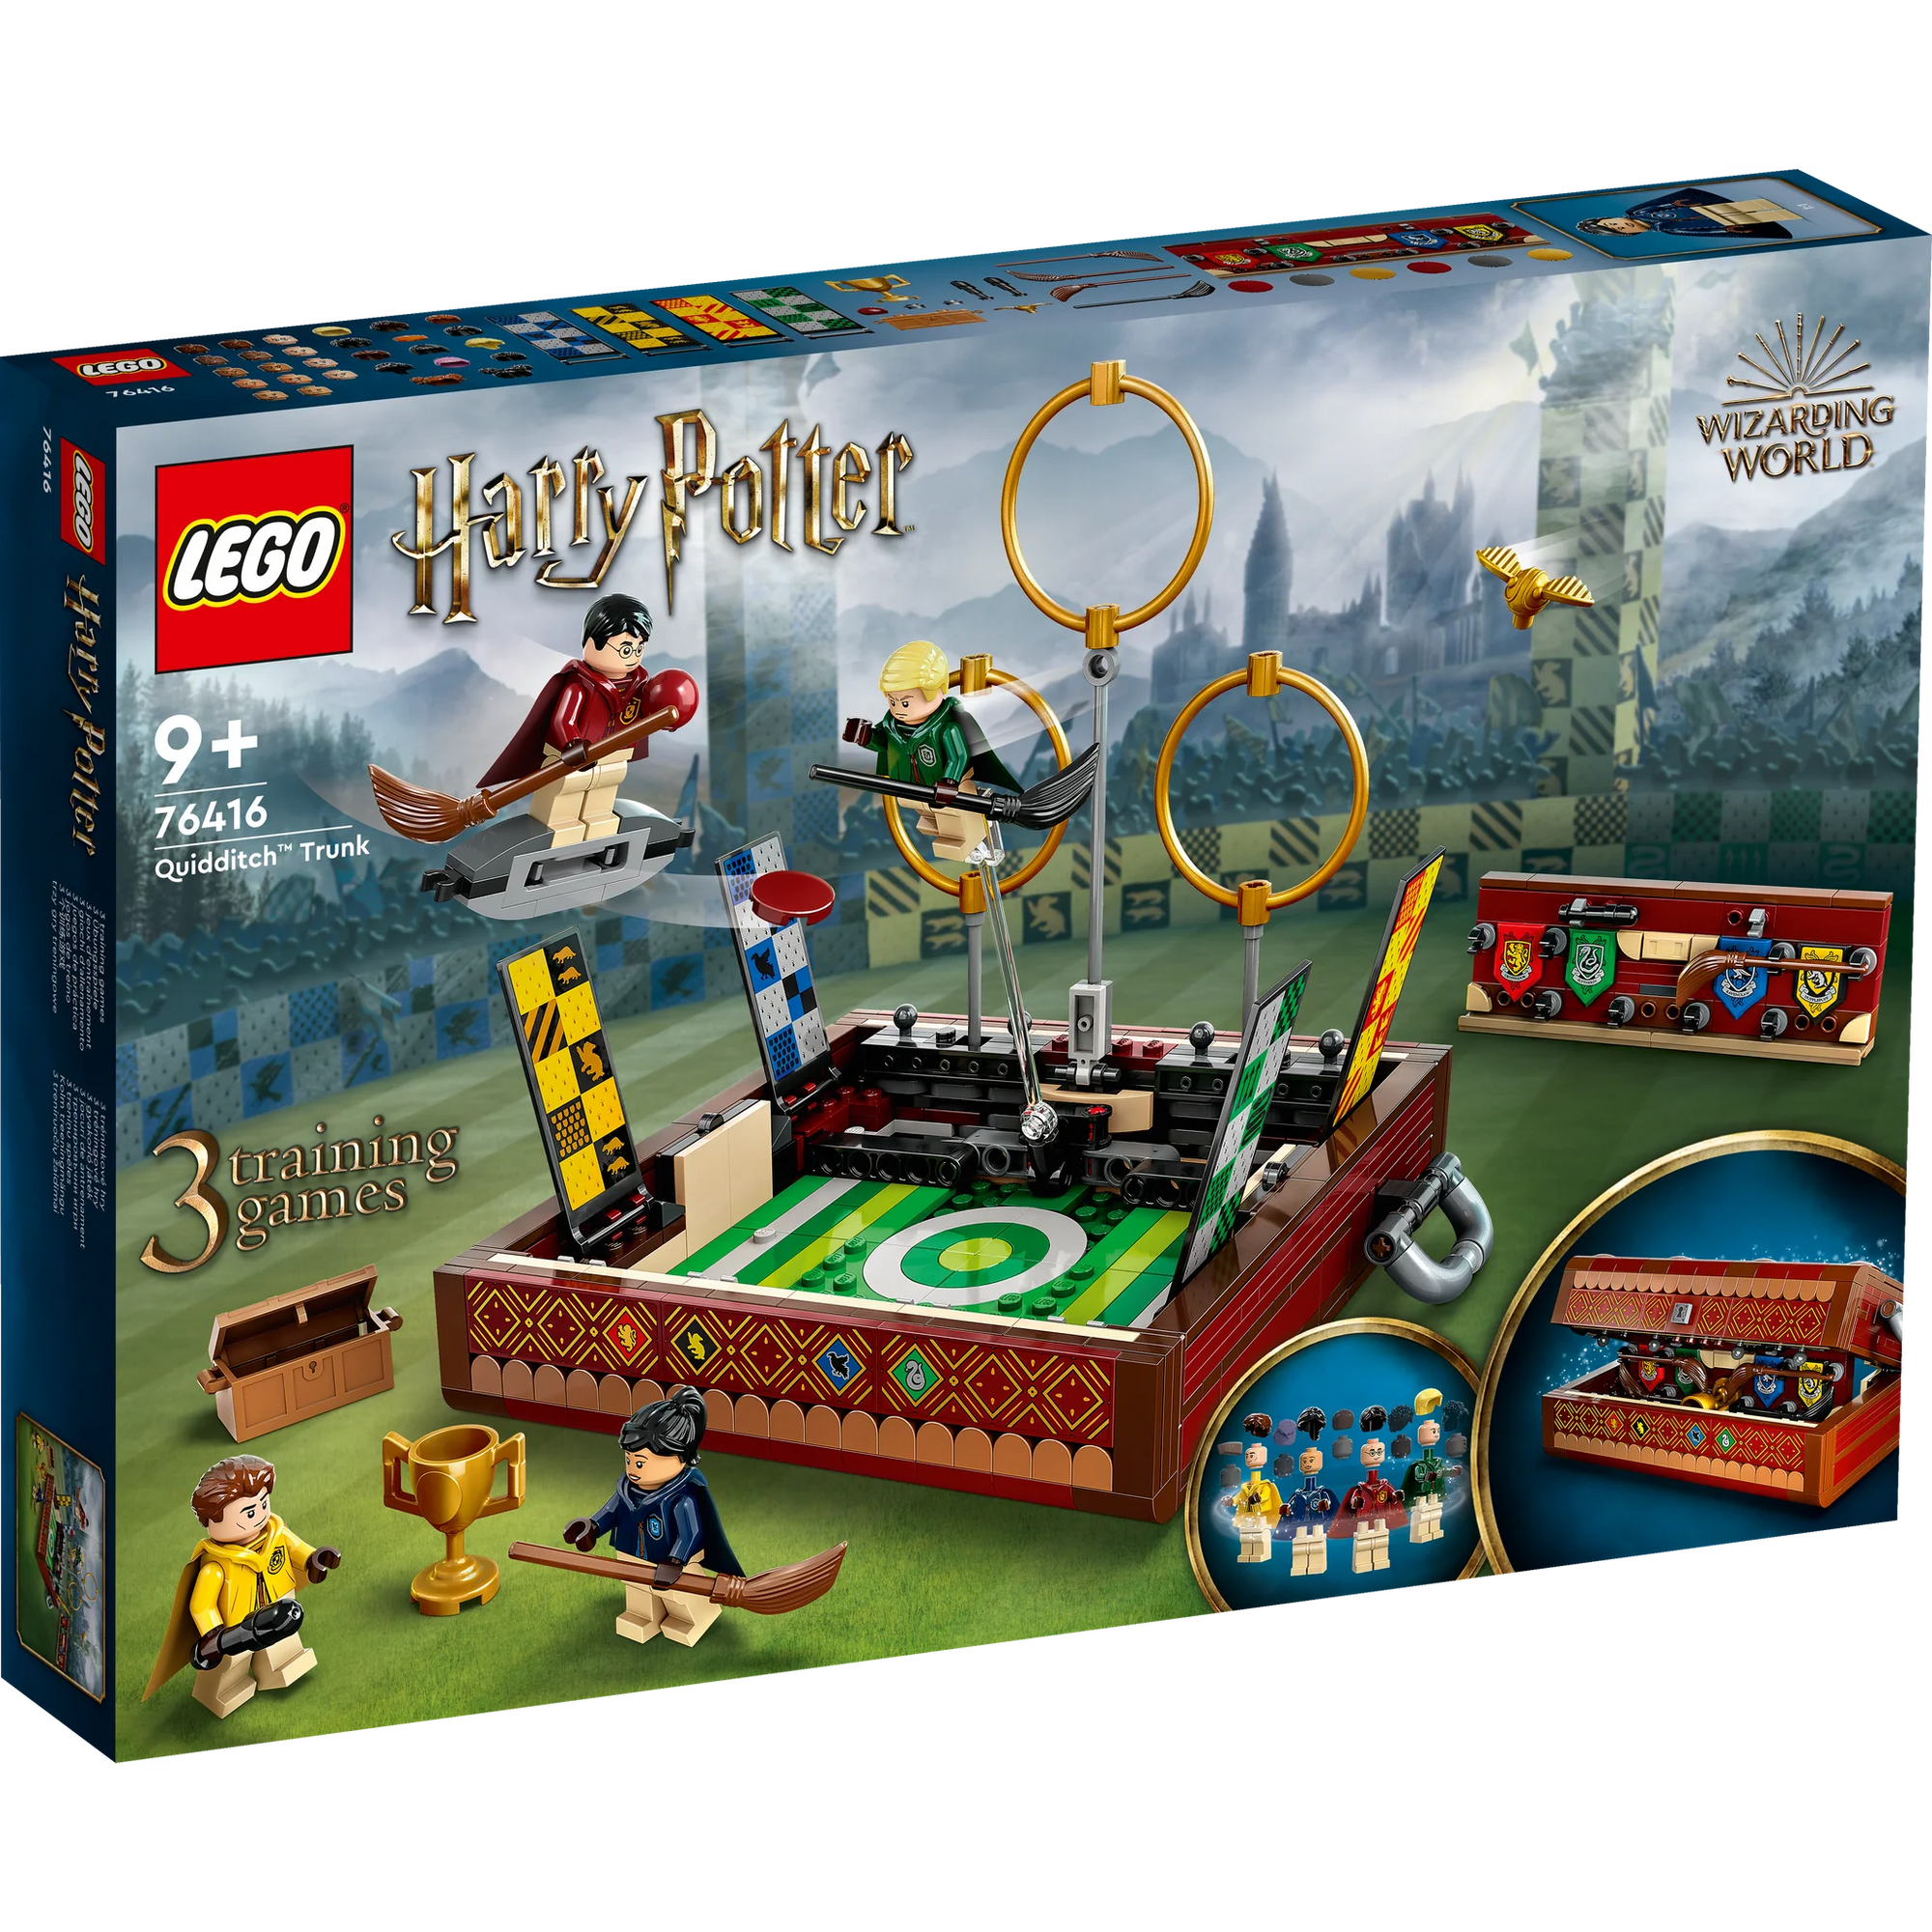 Lego 76416 Harry Potter Quidditch Trunk